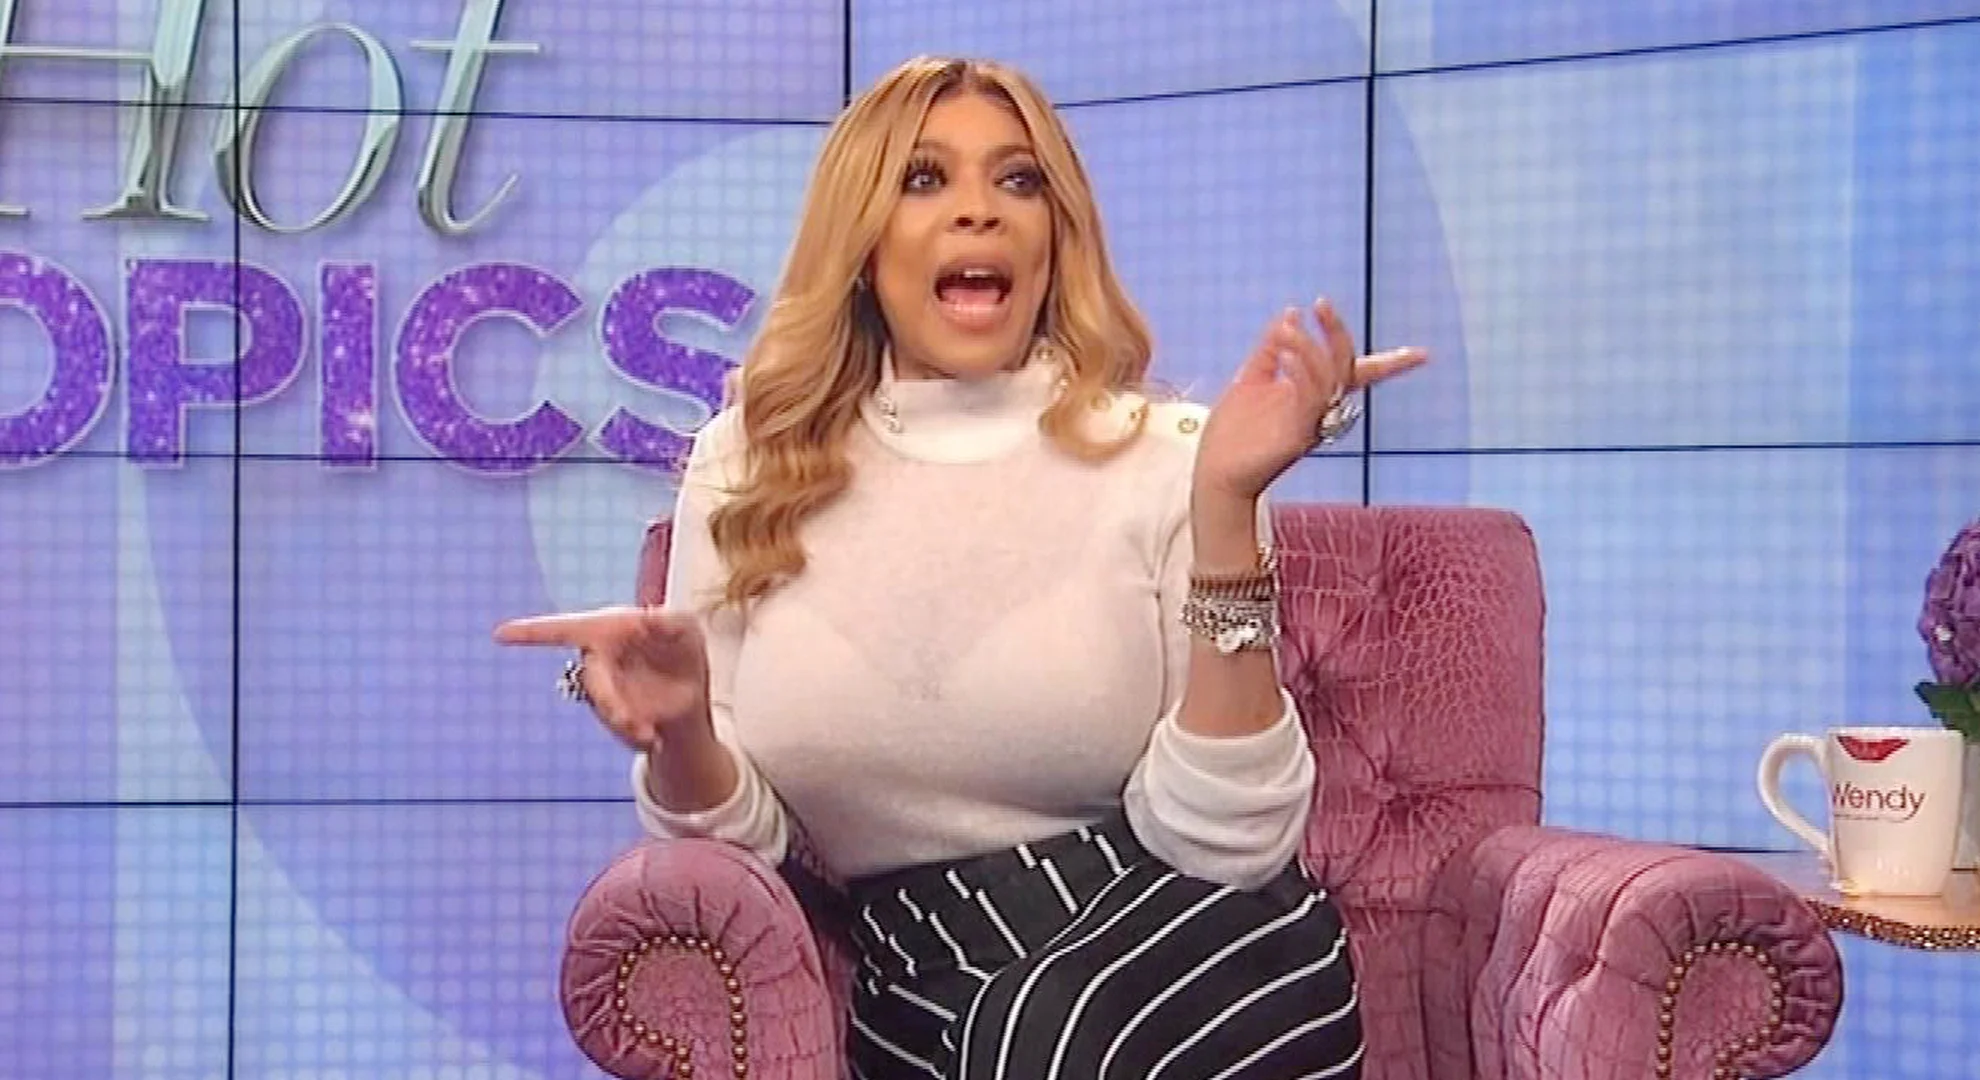 Wendy Williams Opens Up About Her Final Episode of Her Show and Her Future Plans